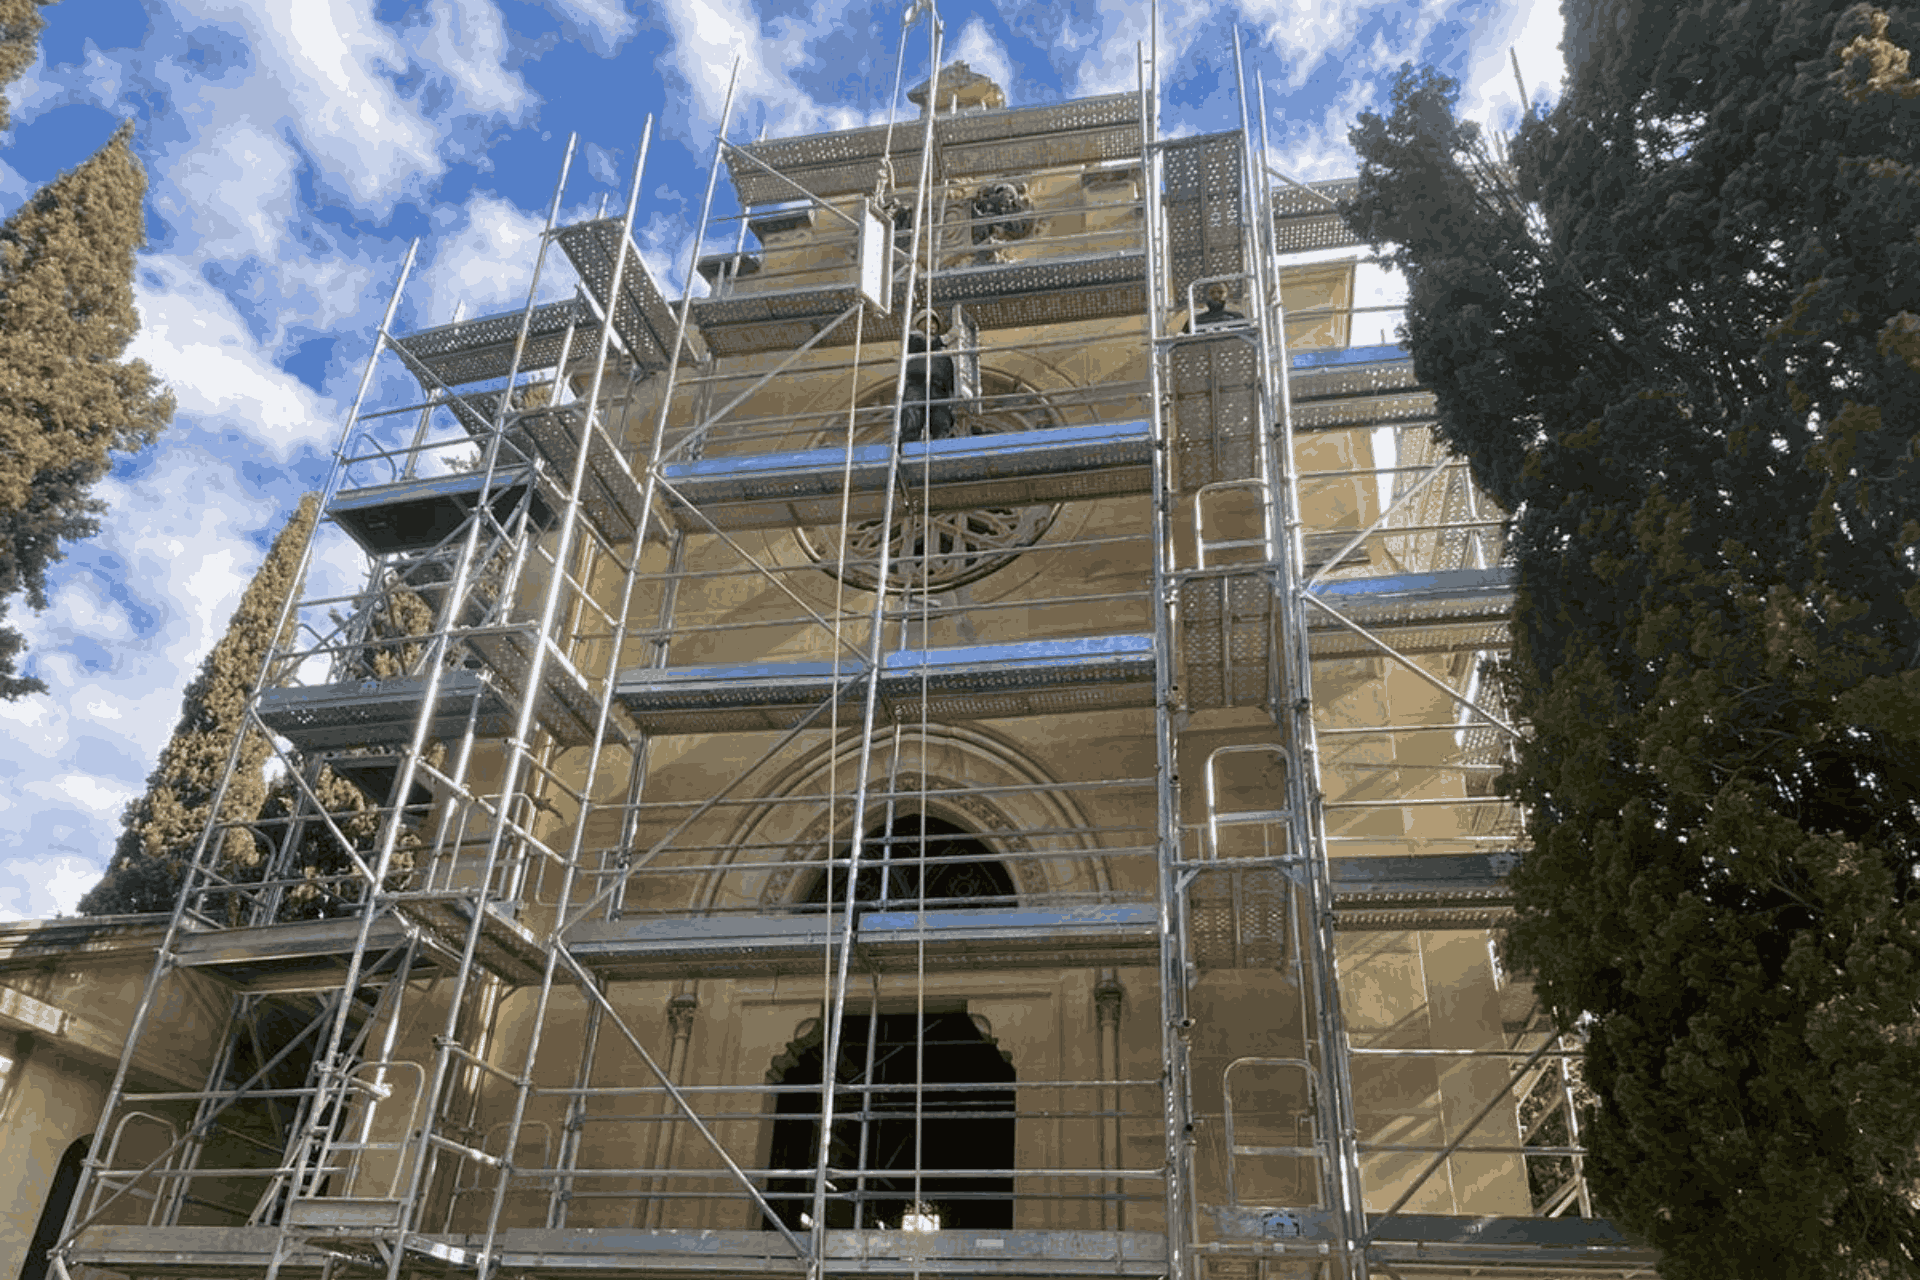 Start of restoration work on the Pantheon of the Marquises of La Torrecilla, part of the historical heritage of the Ducal House of Medinaceli Foundation.